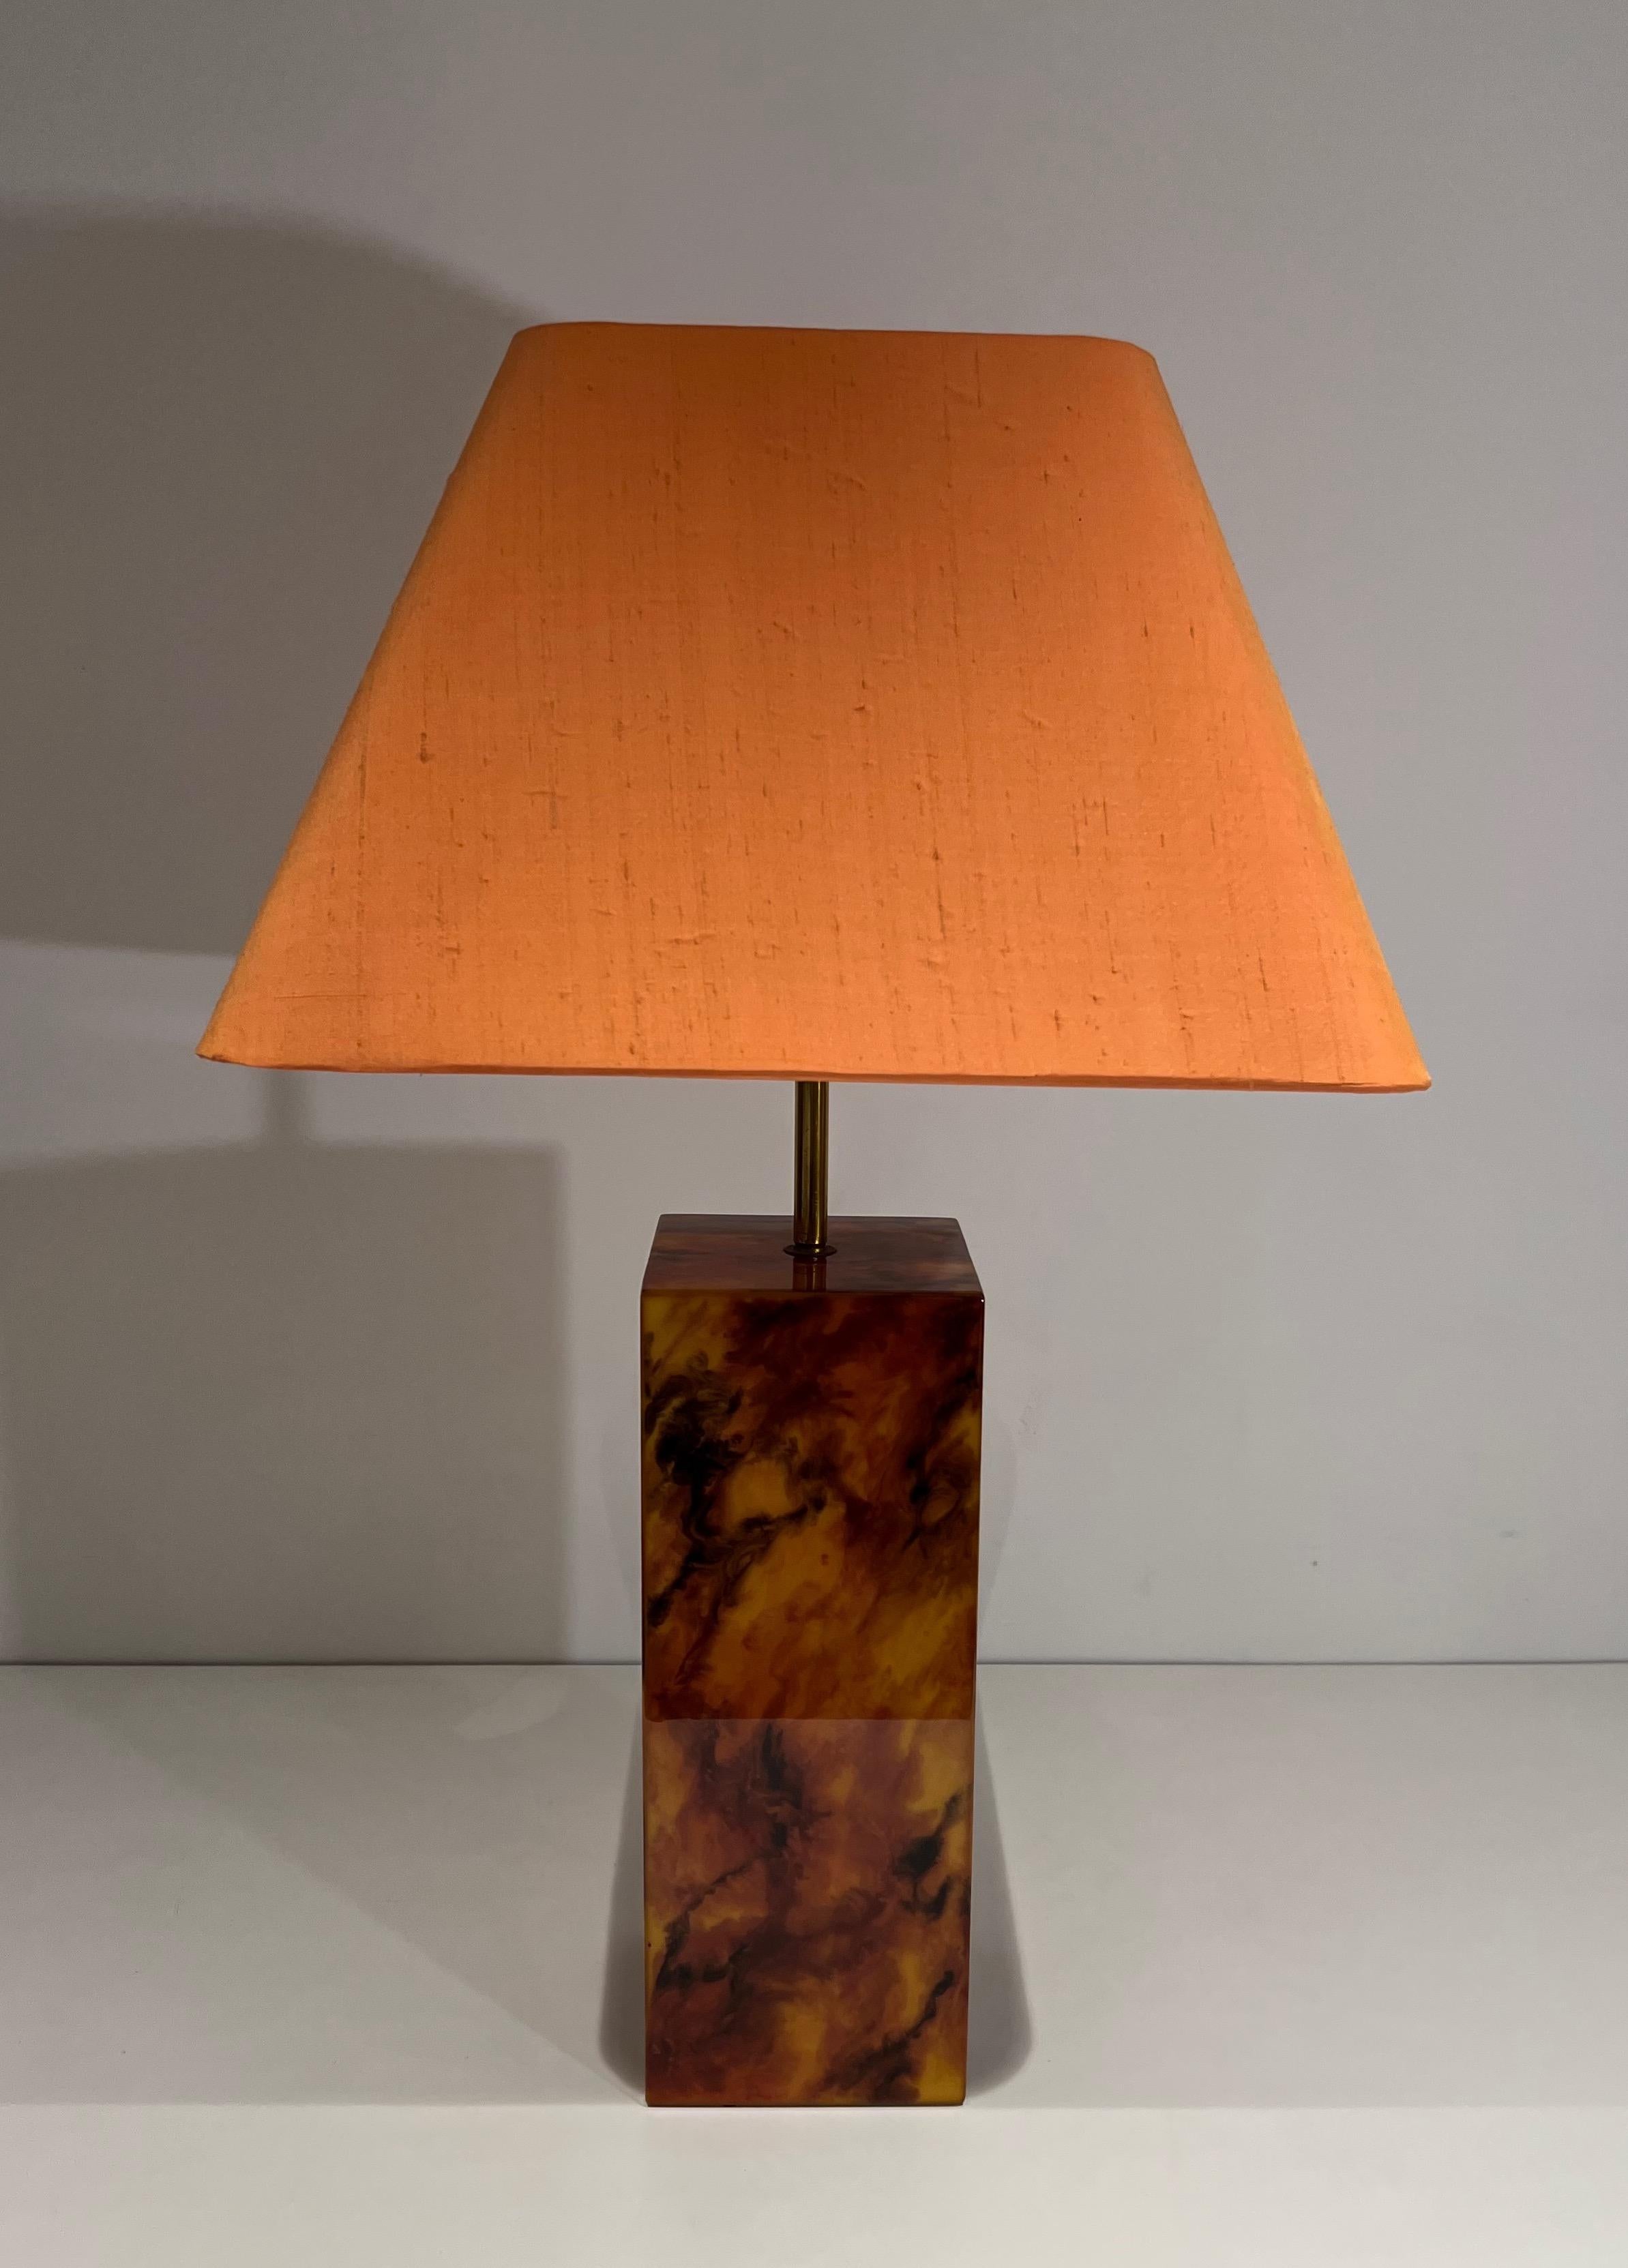 Pair of Lucite Lamps Imitating Tortoise Shell. French work. Circa 1970 For Sale 6